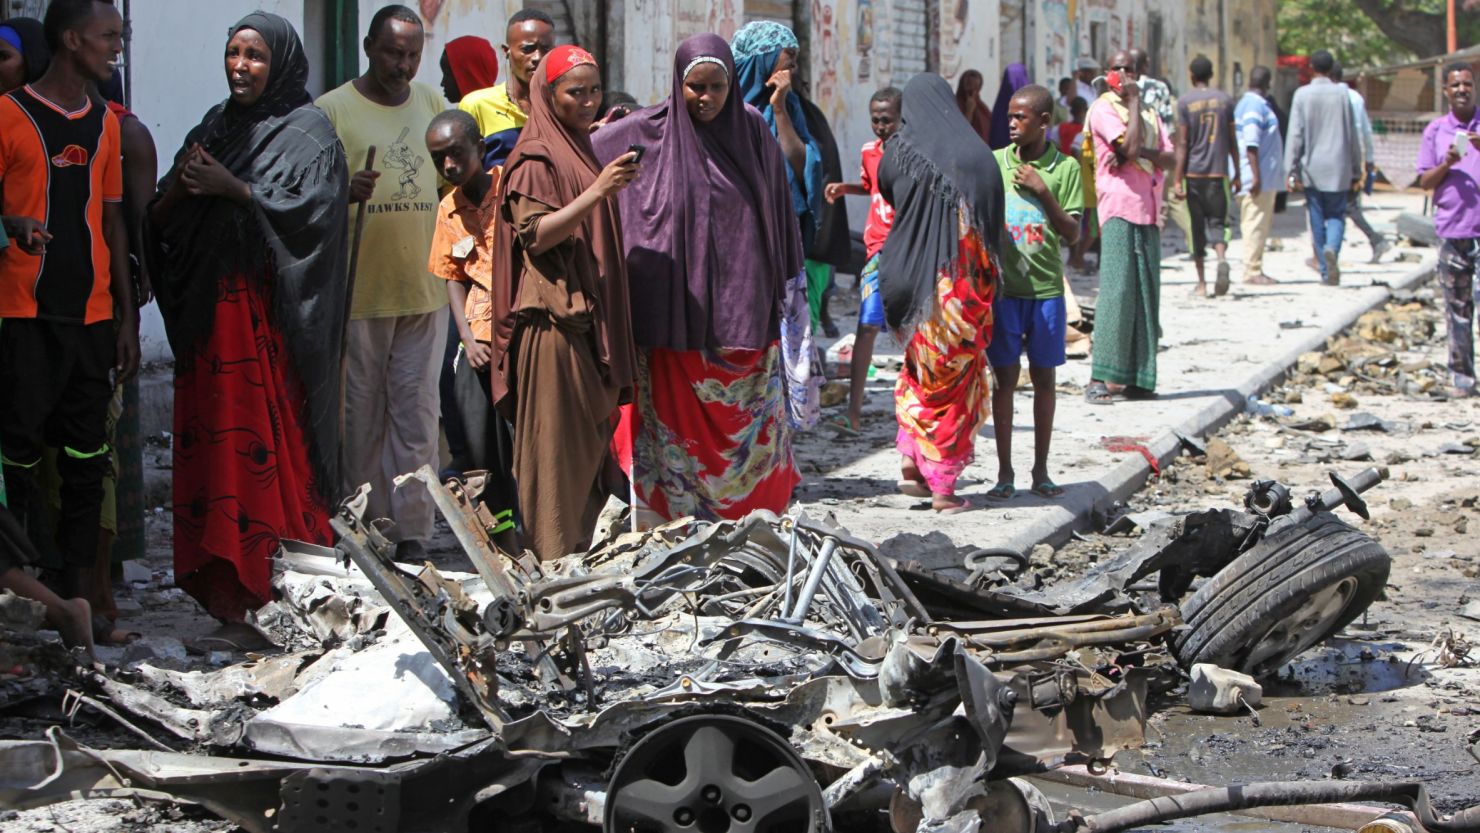 Somalis stand over the wreckage of a car bomb in Mogadishu.